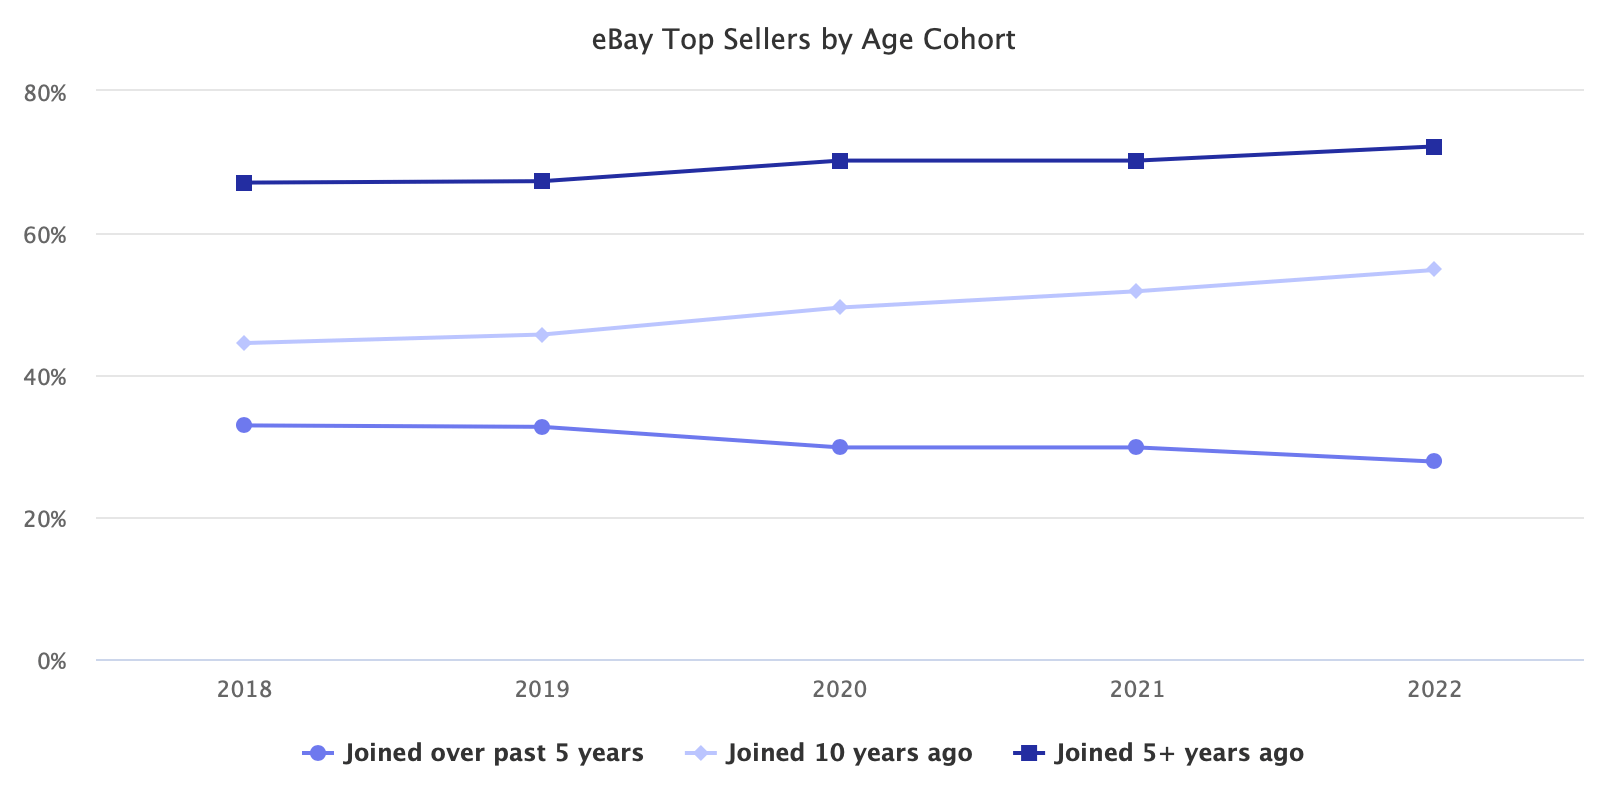 eBay Top Sellers by Age Cohort